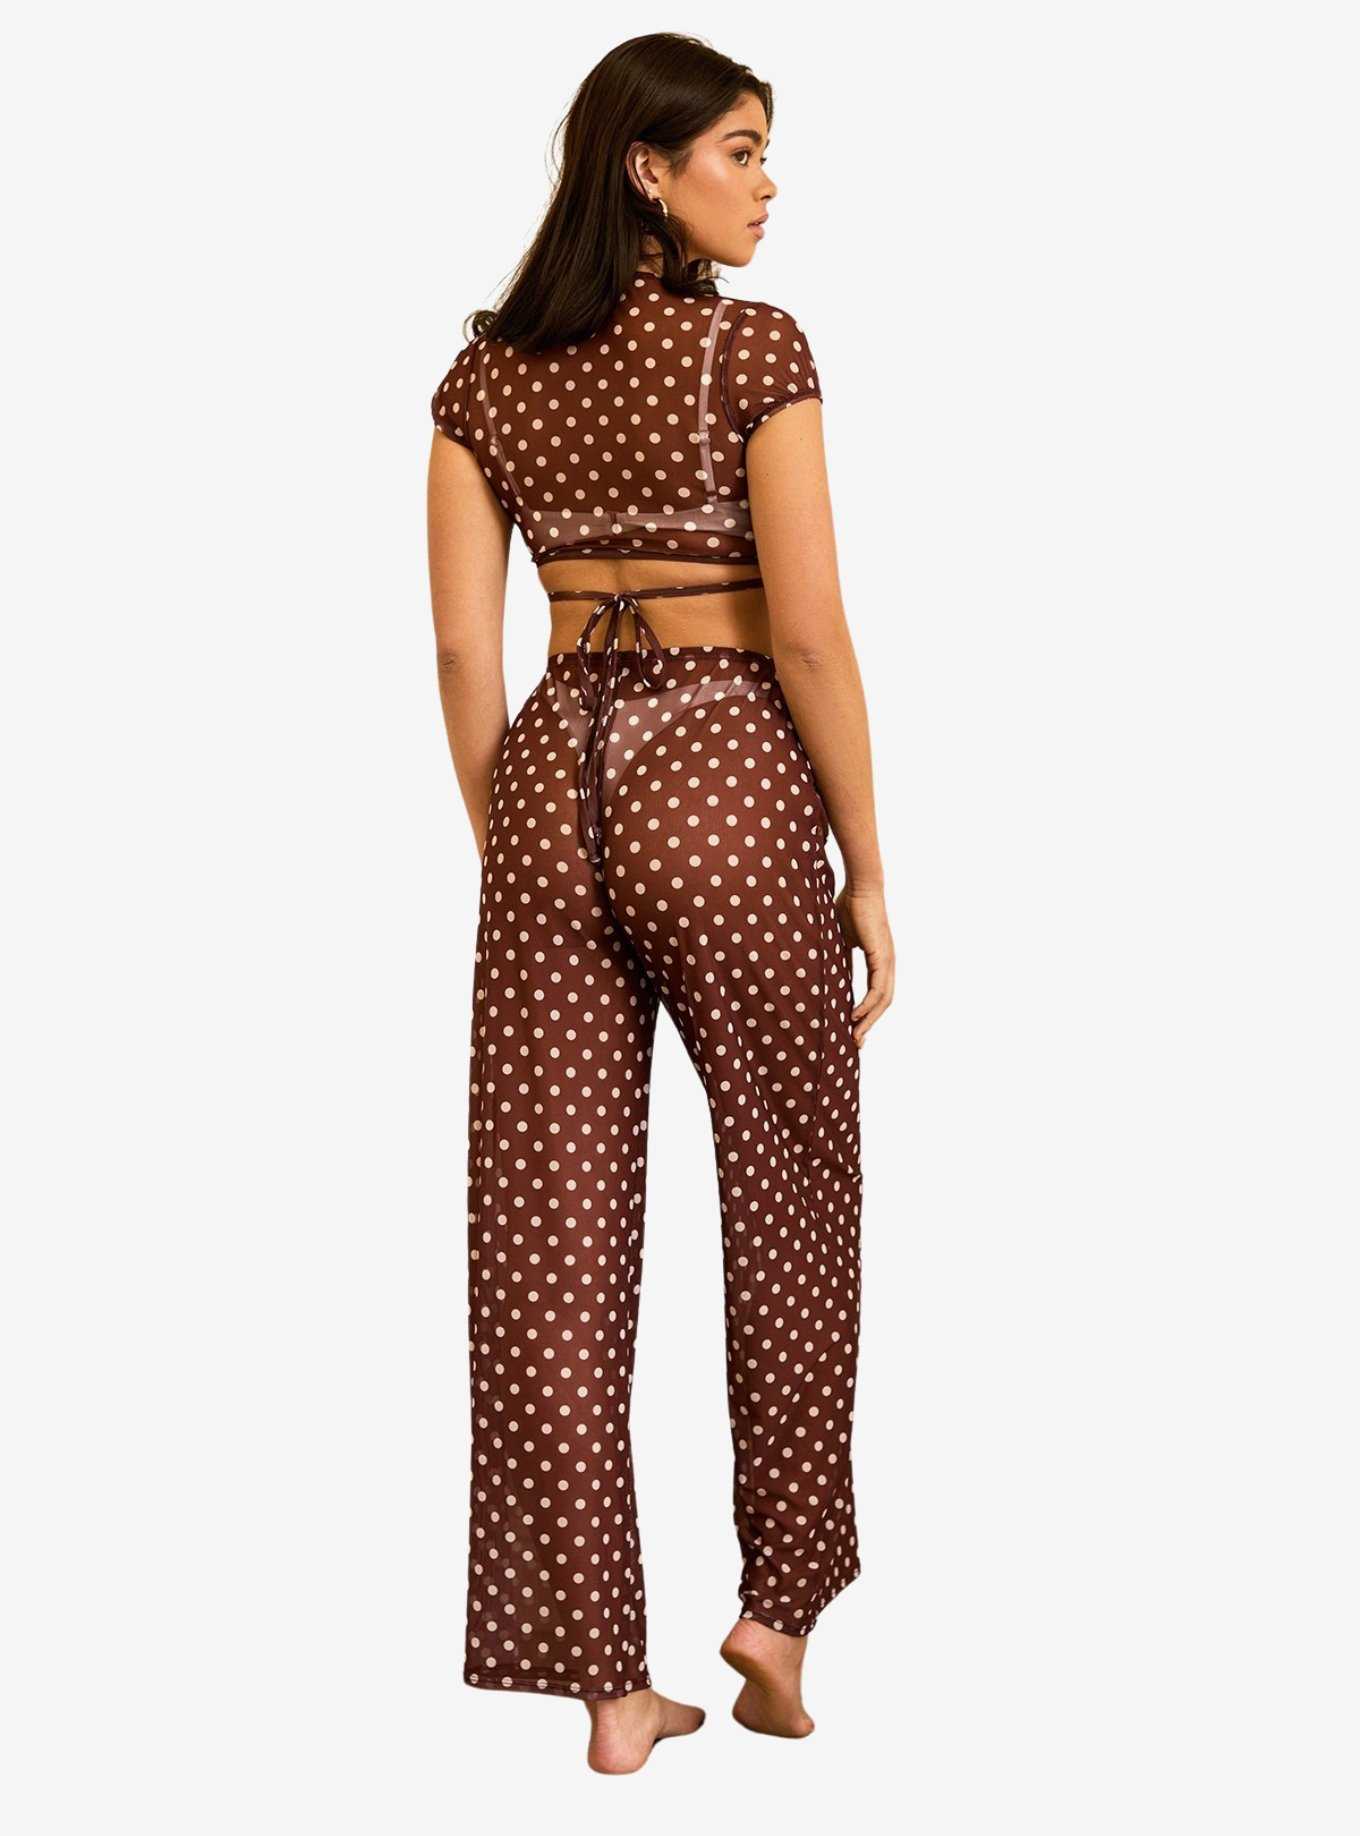 Dippin' Daisy's That Girl Swim Cover-Up Pants Dotted Brown, , hi-res